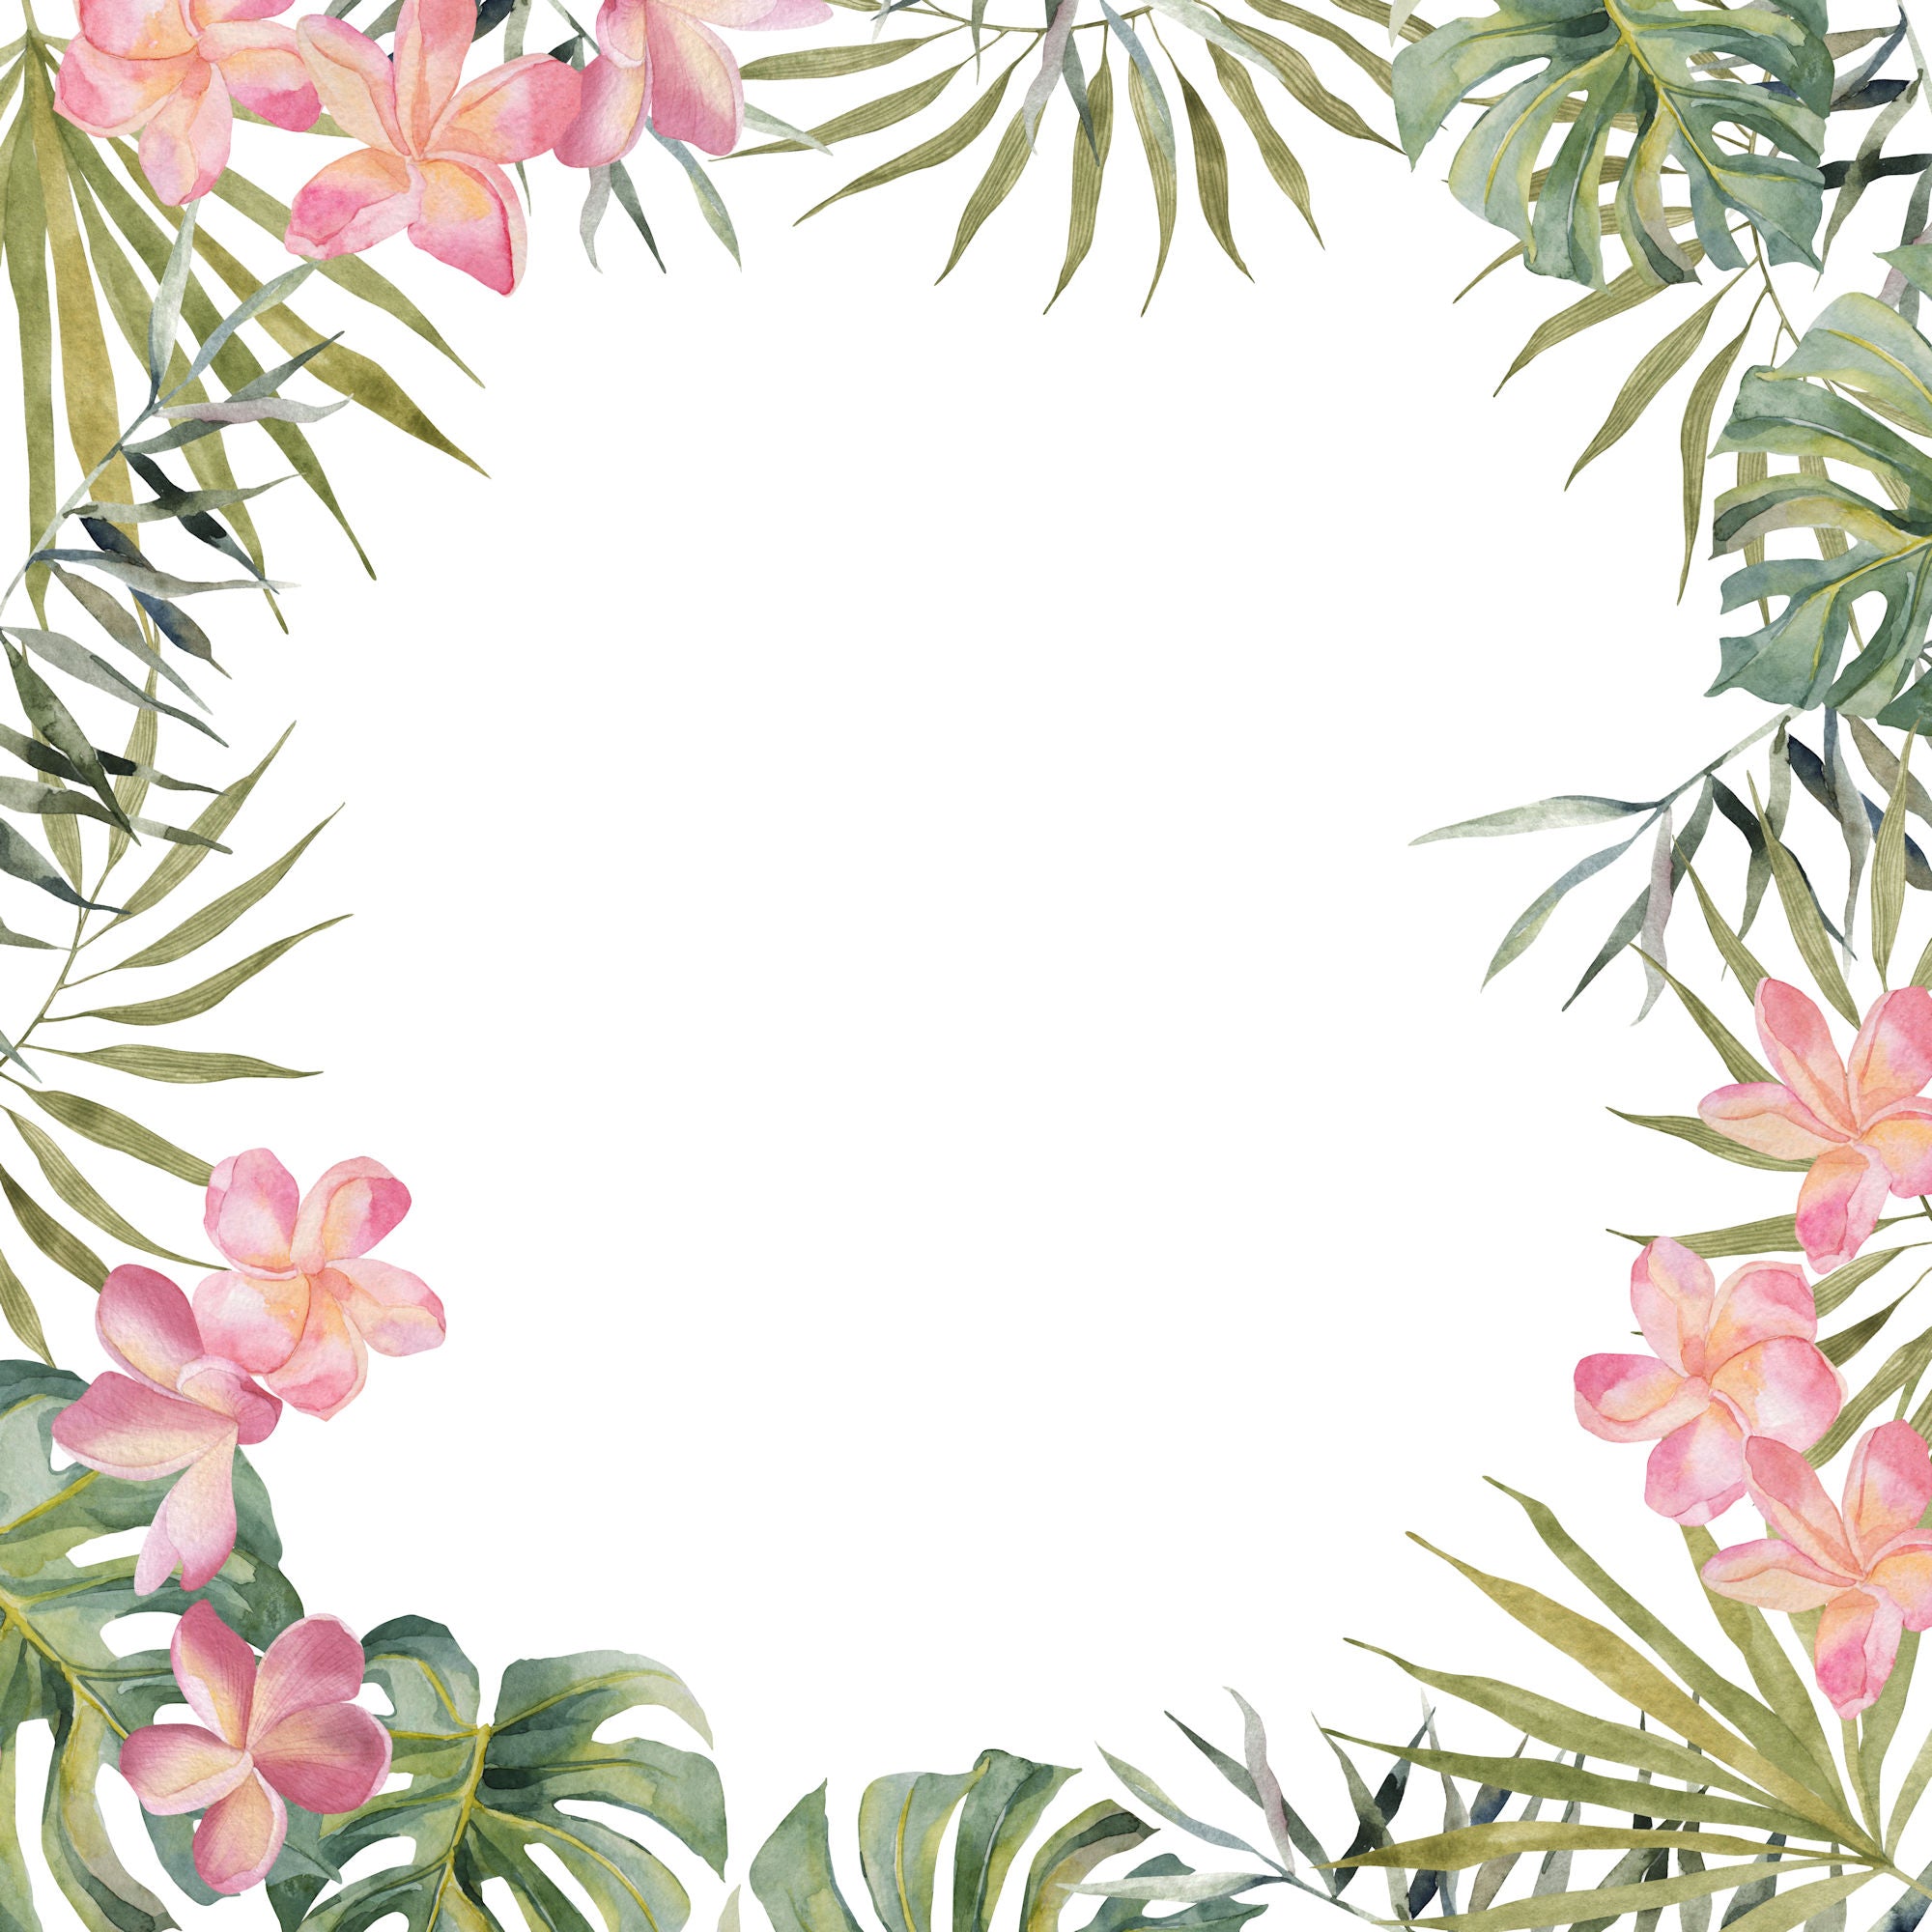 Tropical Paradise Collection Jamaica 12 x 12 Double-Sided Scrapbook Paper by SSC Designs